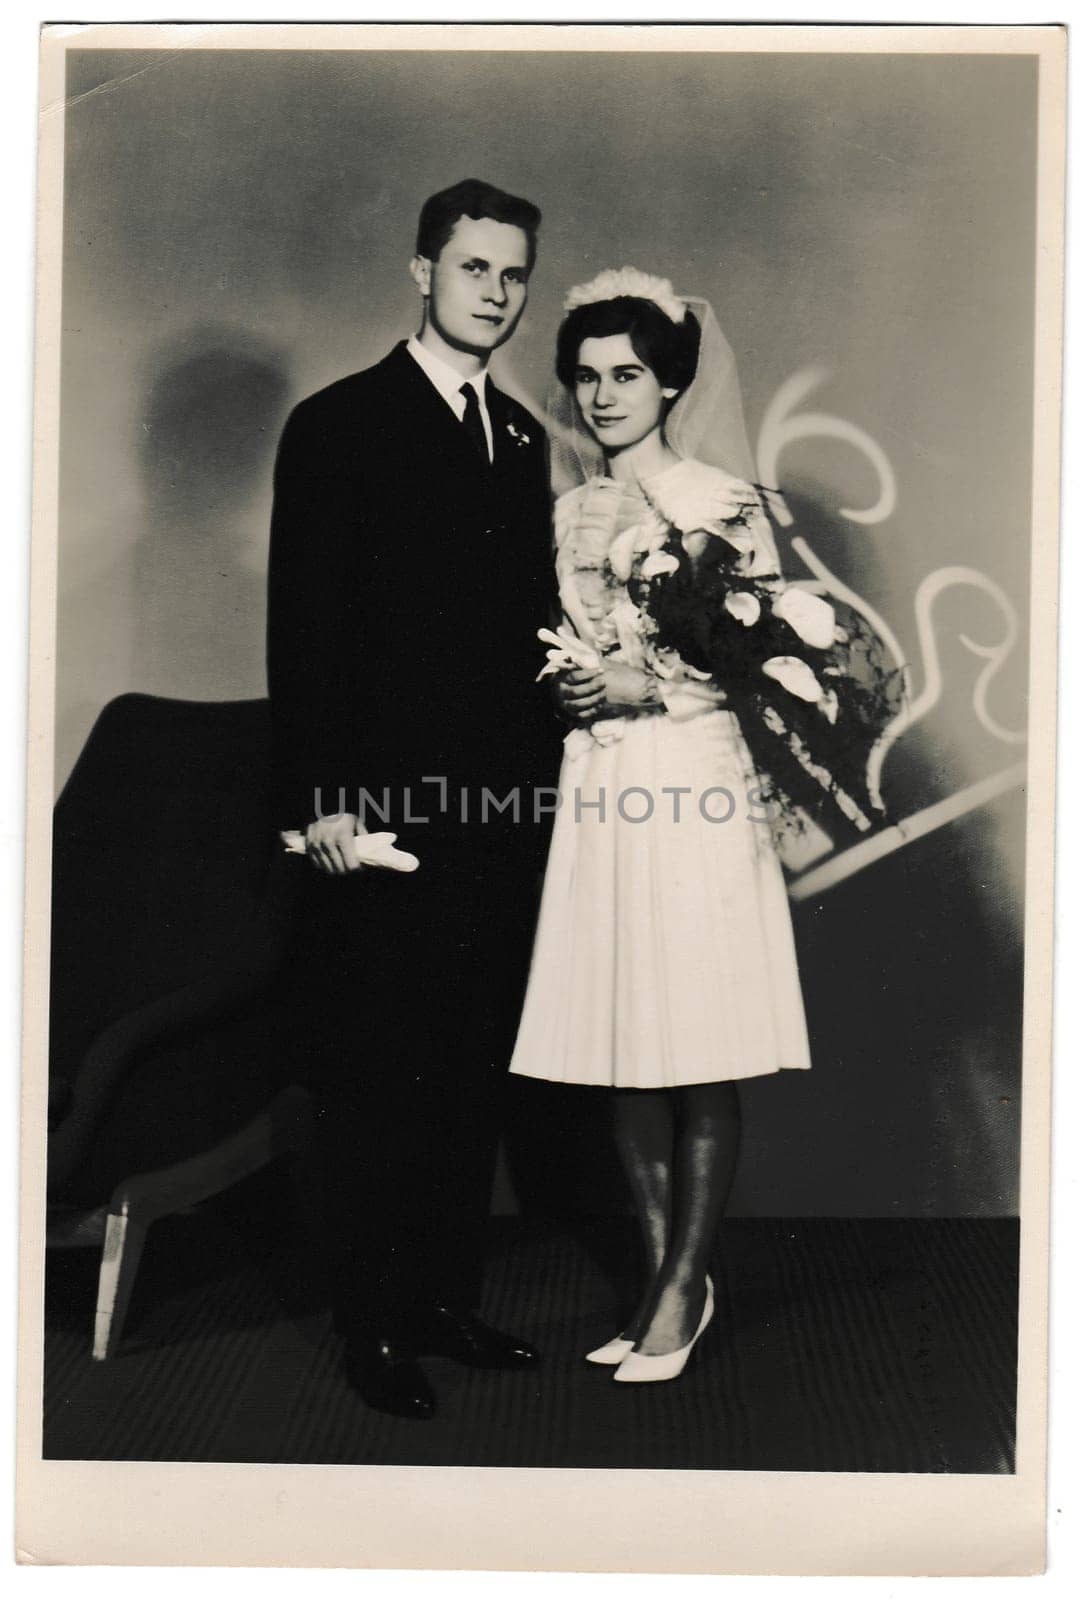 THE CZECHOSLOVAK SOCIALIST REPUBLIC - APRIL 4, 1964: Retro photo shows bride with white kala flowers and groom wears a dark suit and white gloves. Black and white vintage photography of wedding couple.